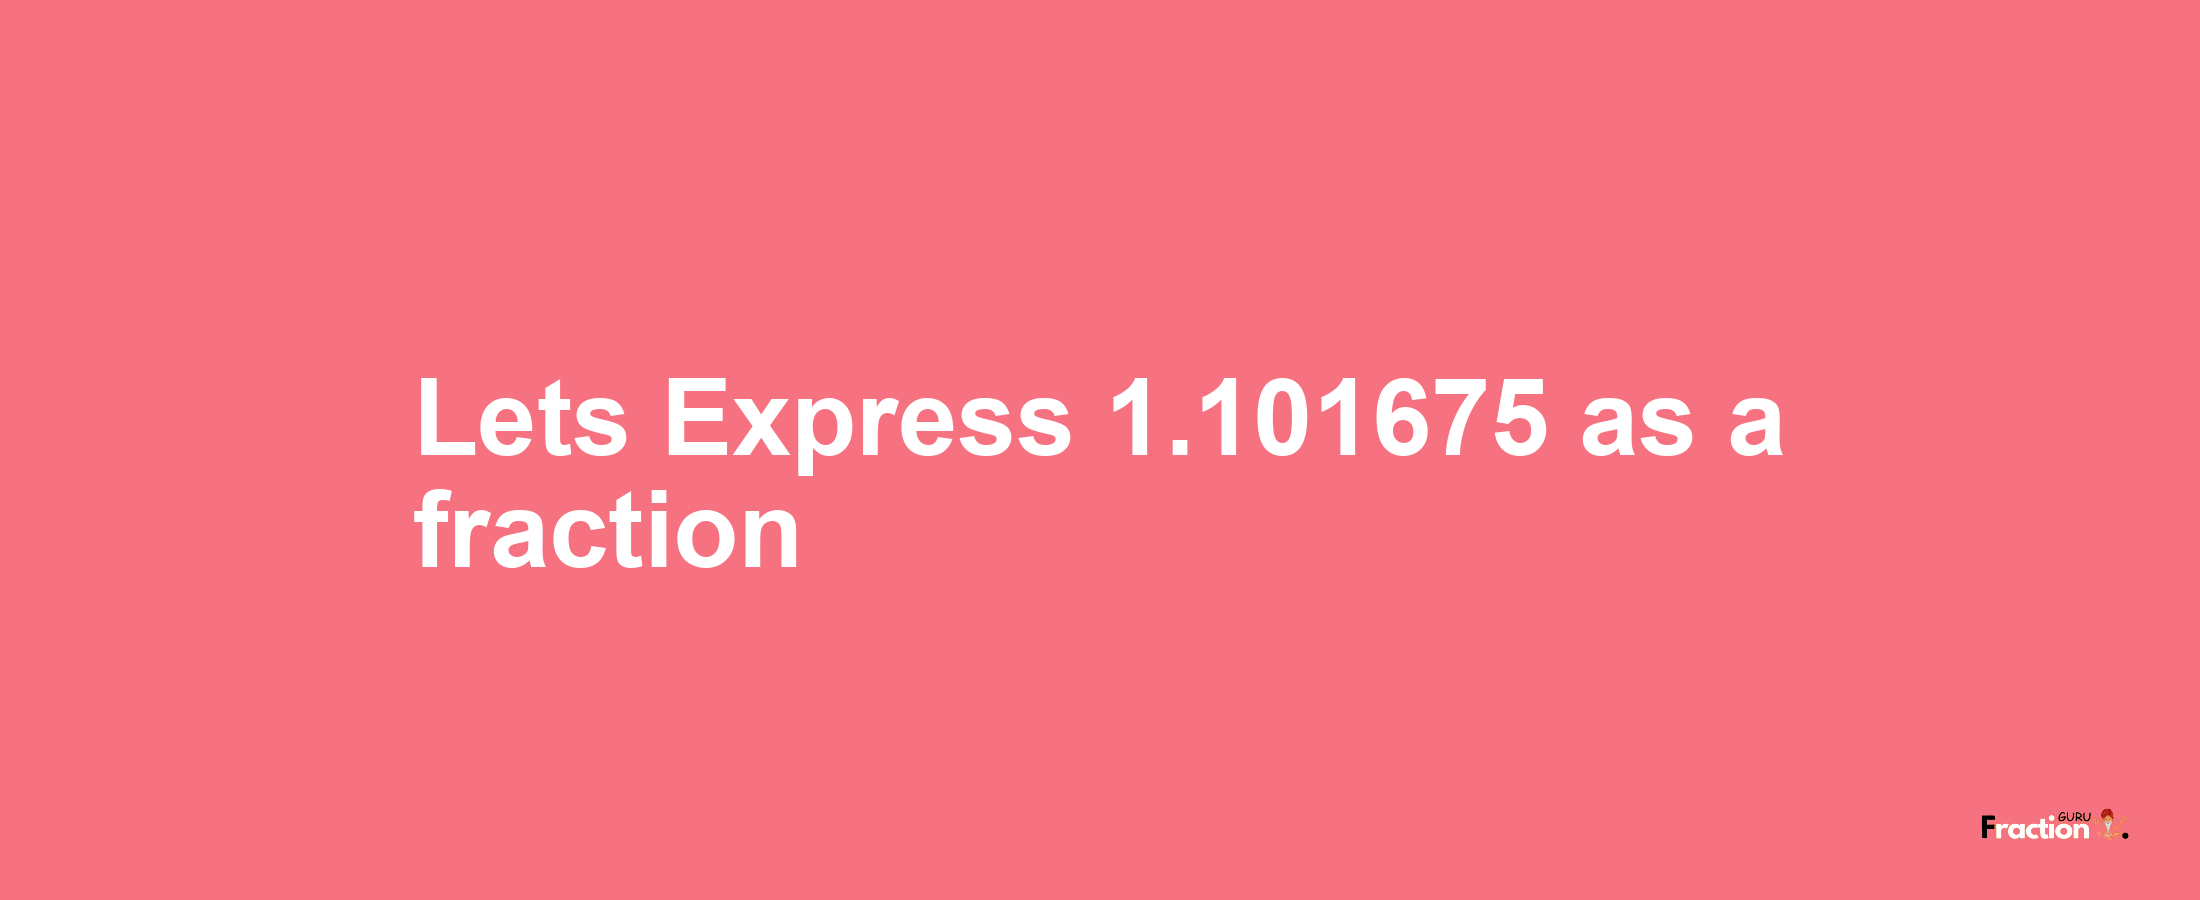 Lets Express 1.101675 as afraction